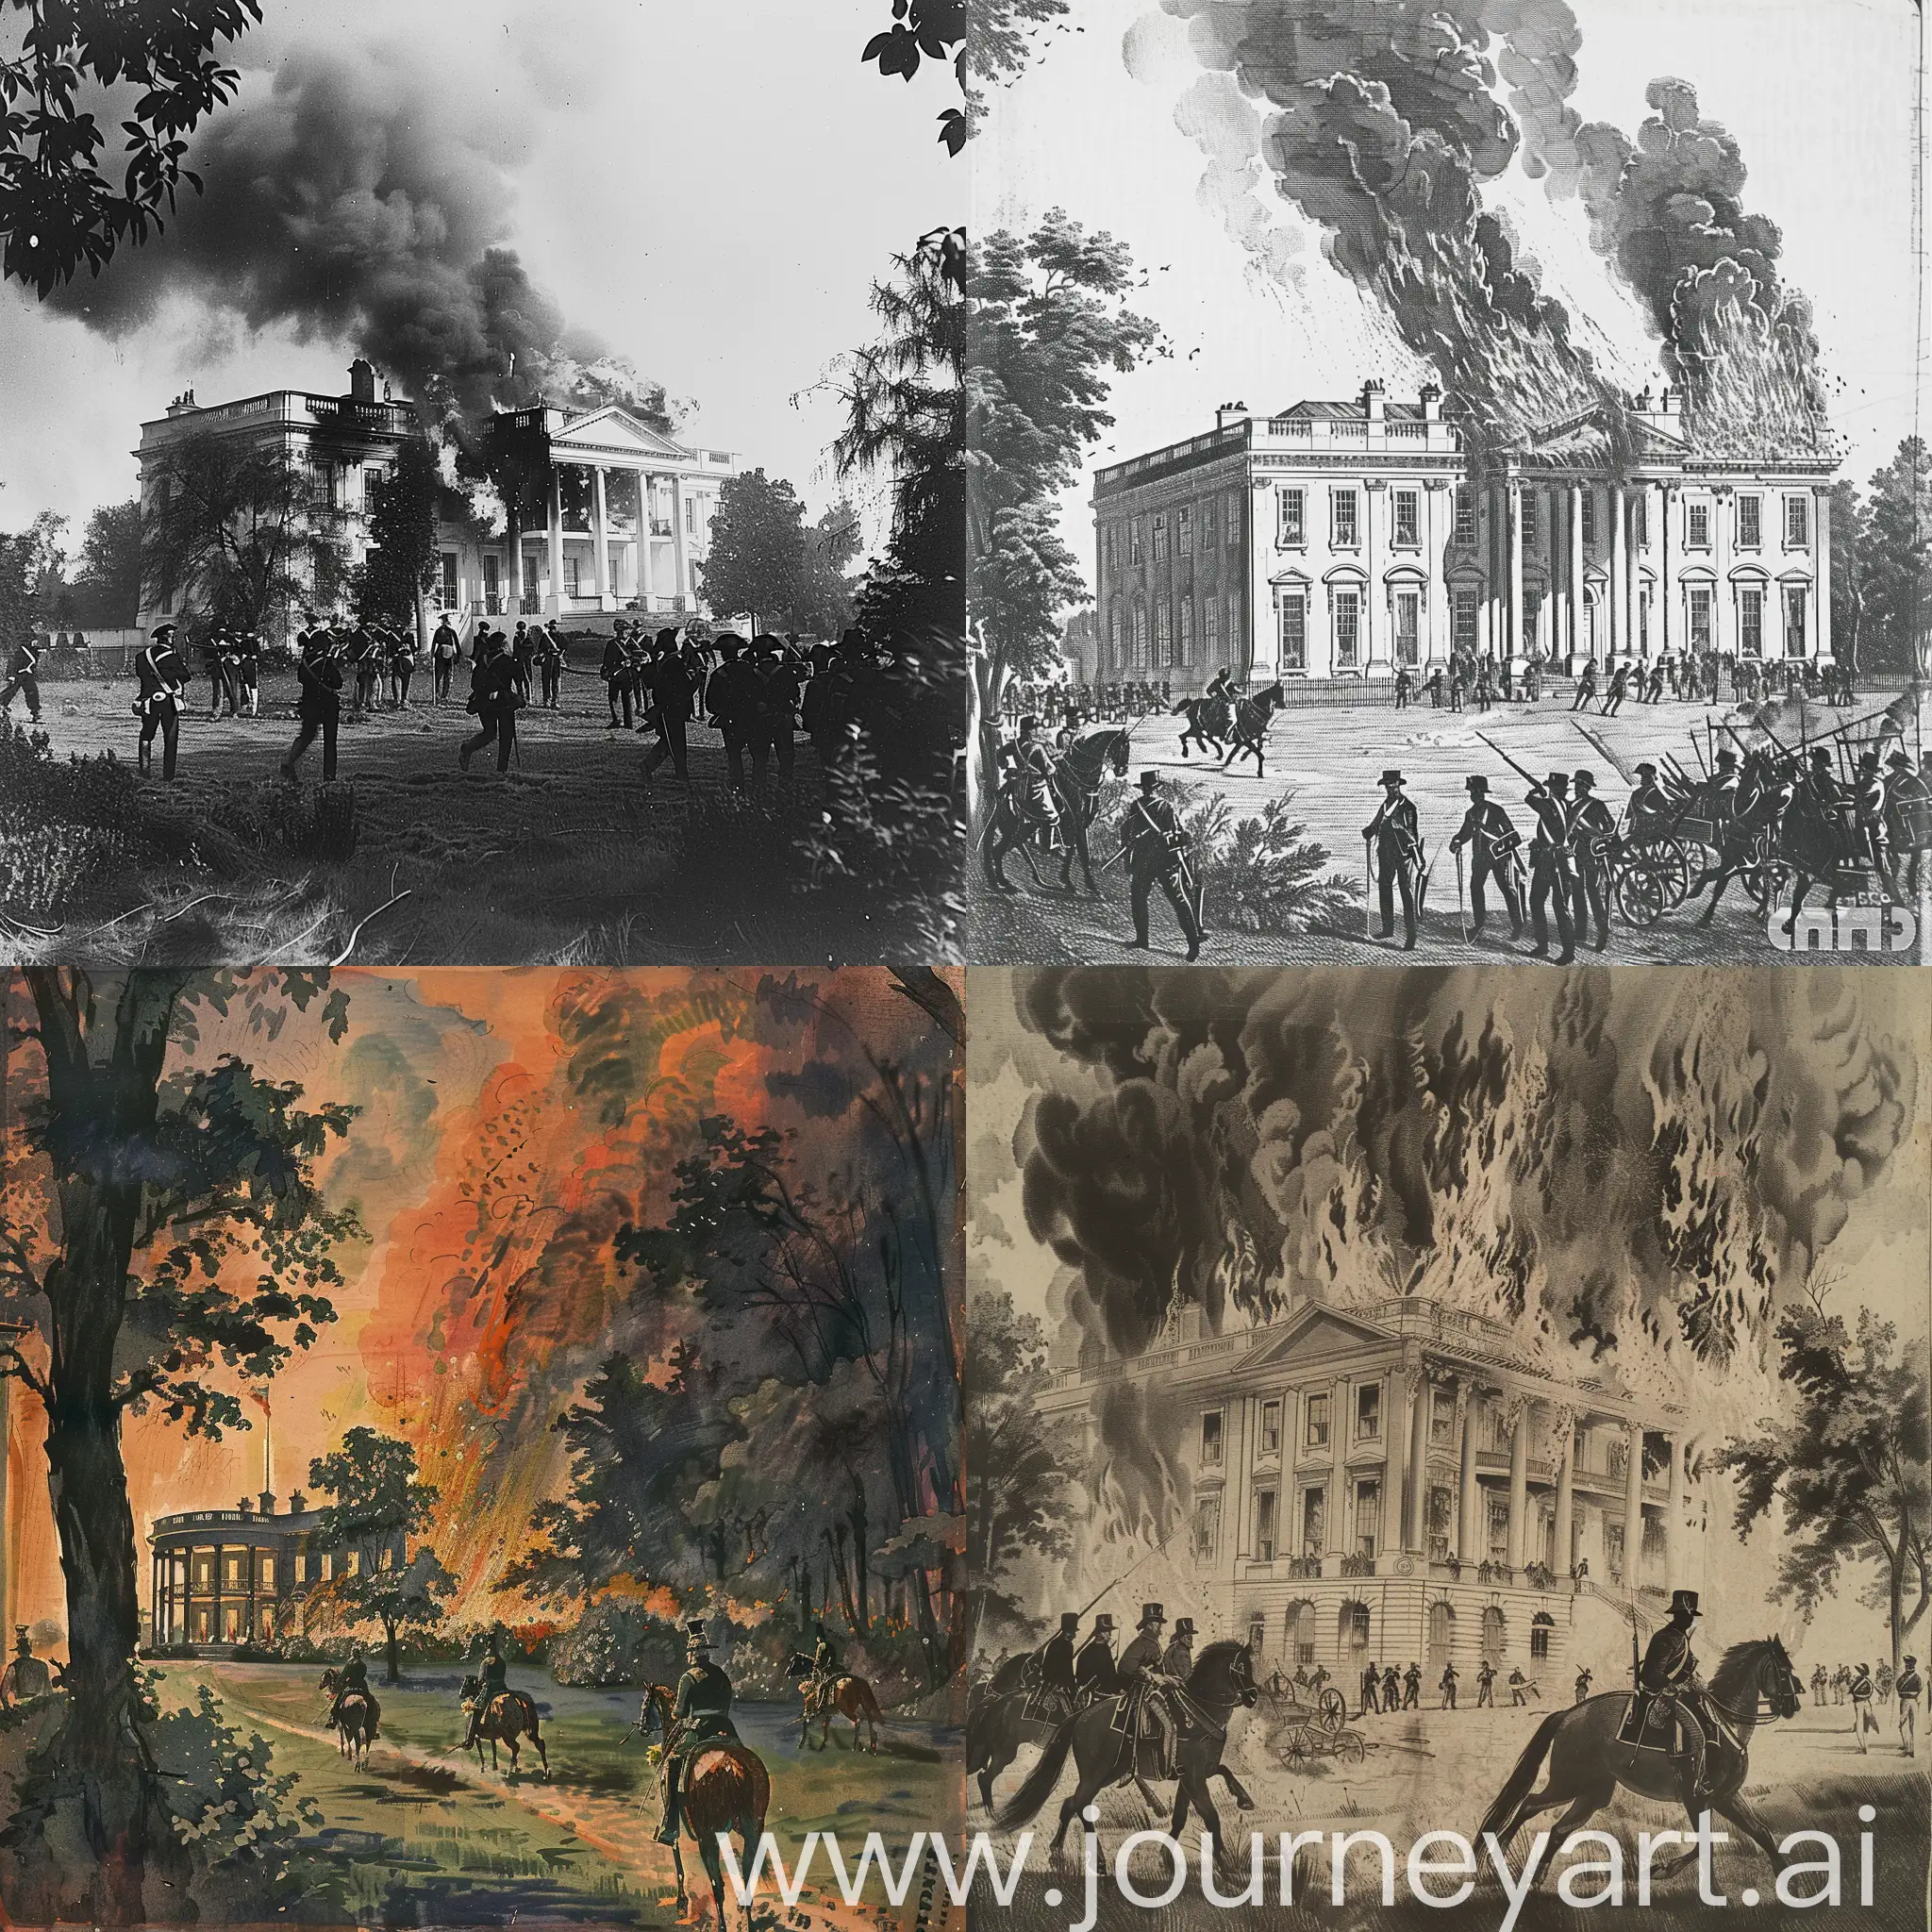 British-Army-Burning-the-White-House-in-the-War-of-1812